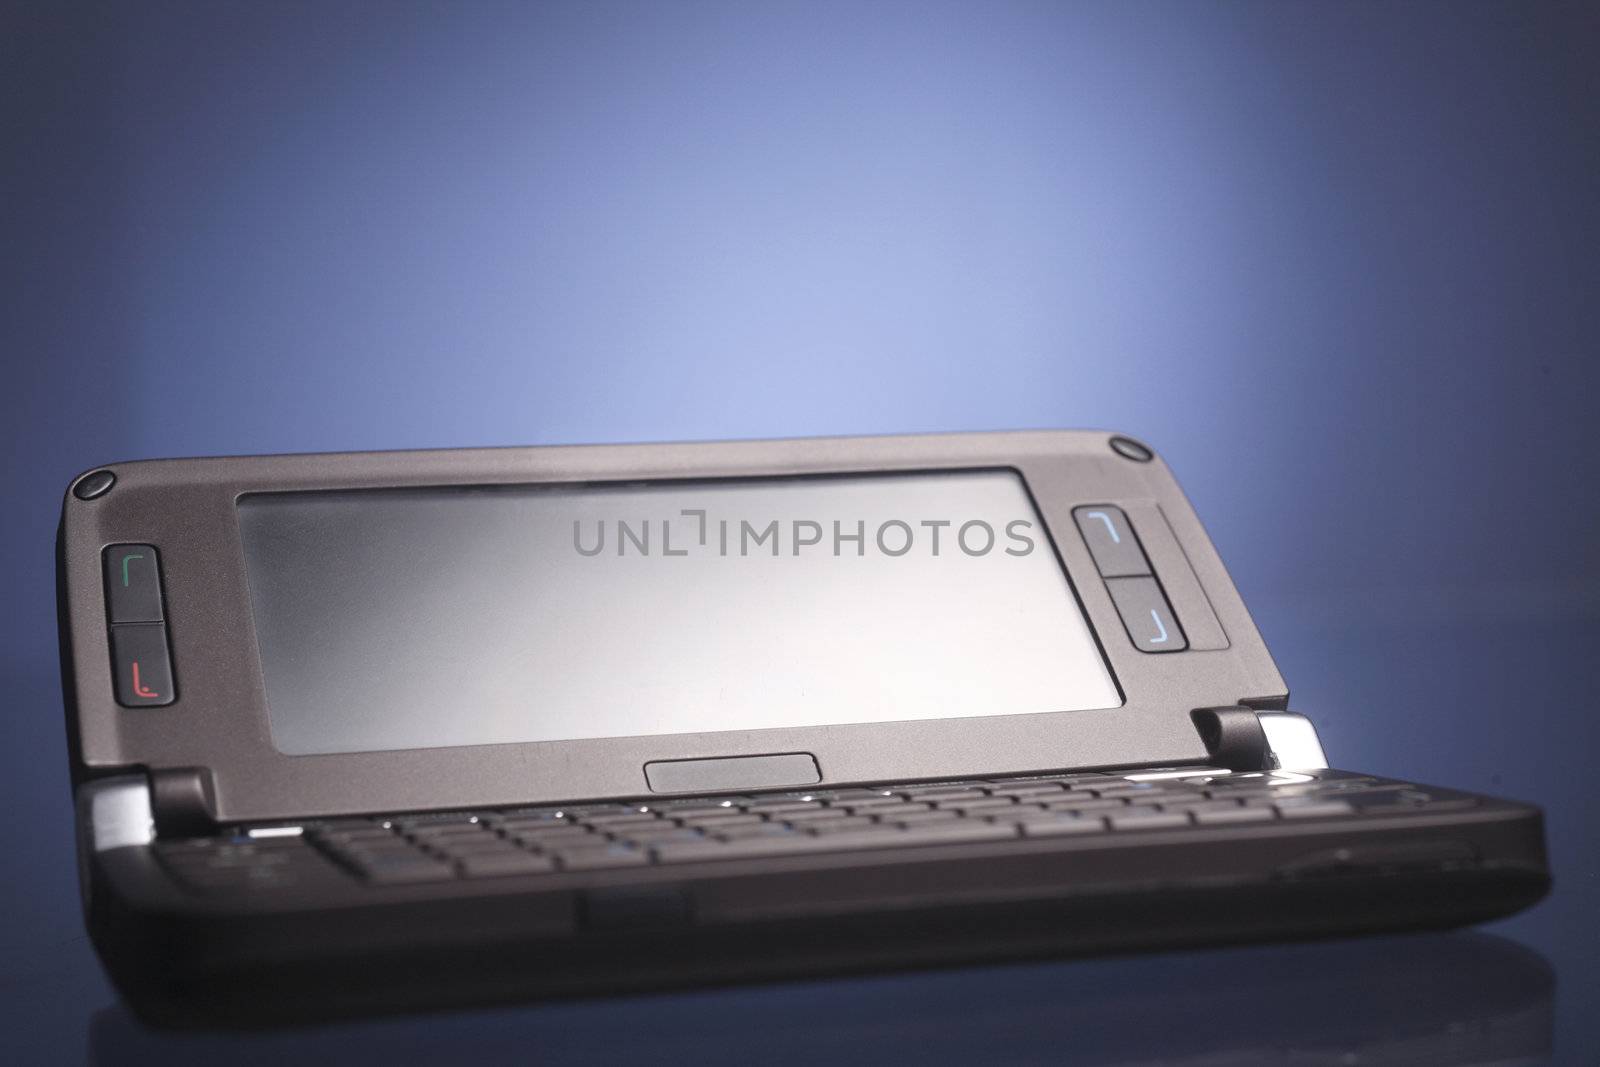 stock image of the mobile phone